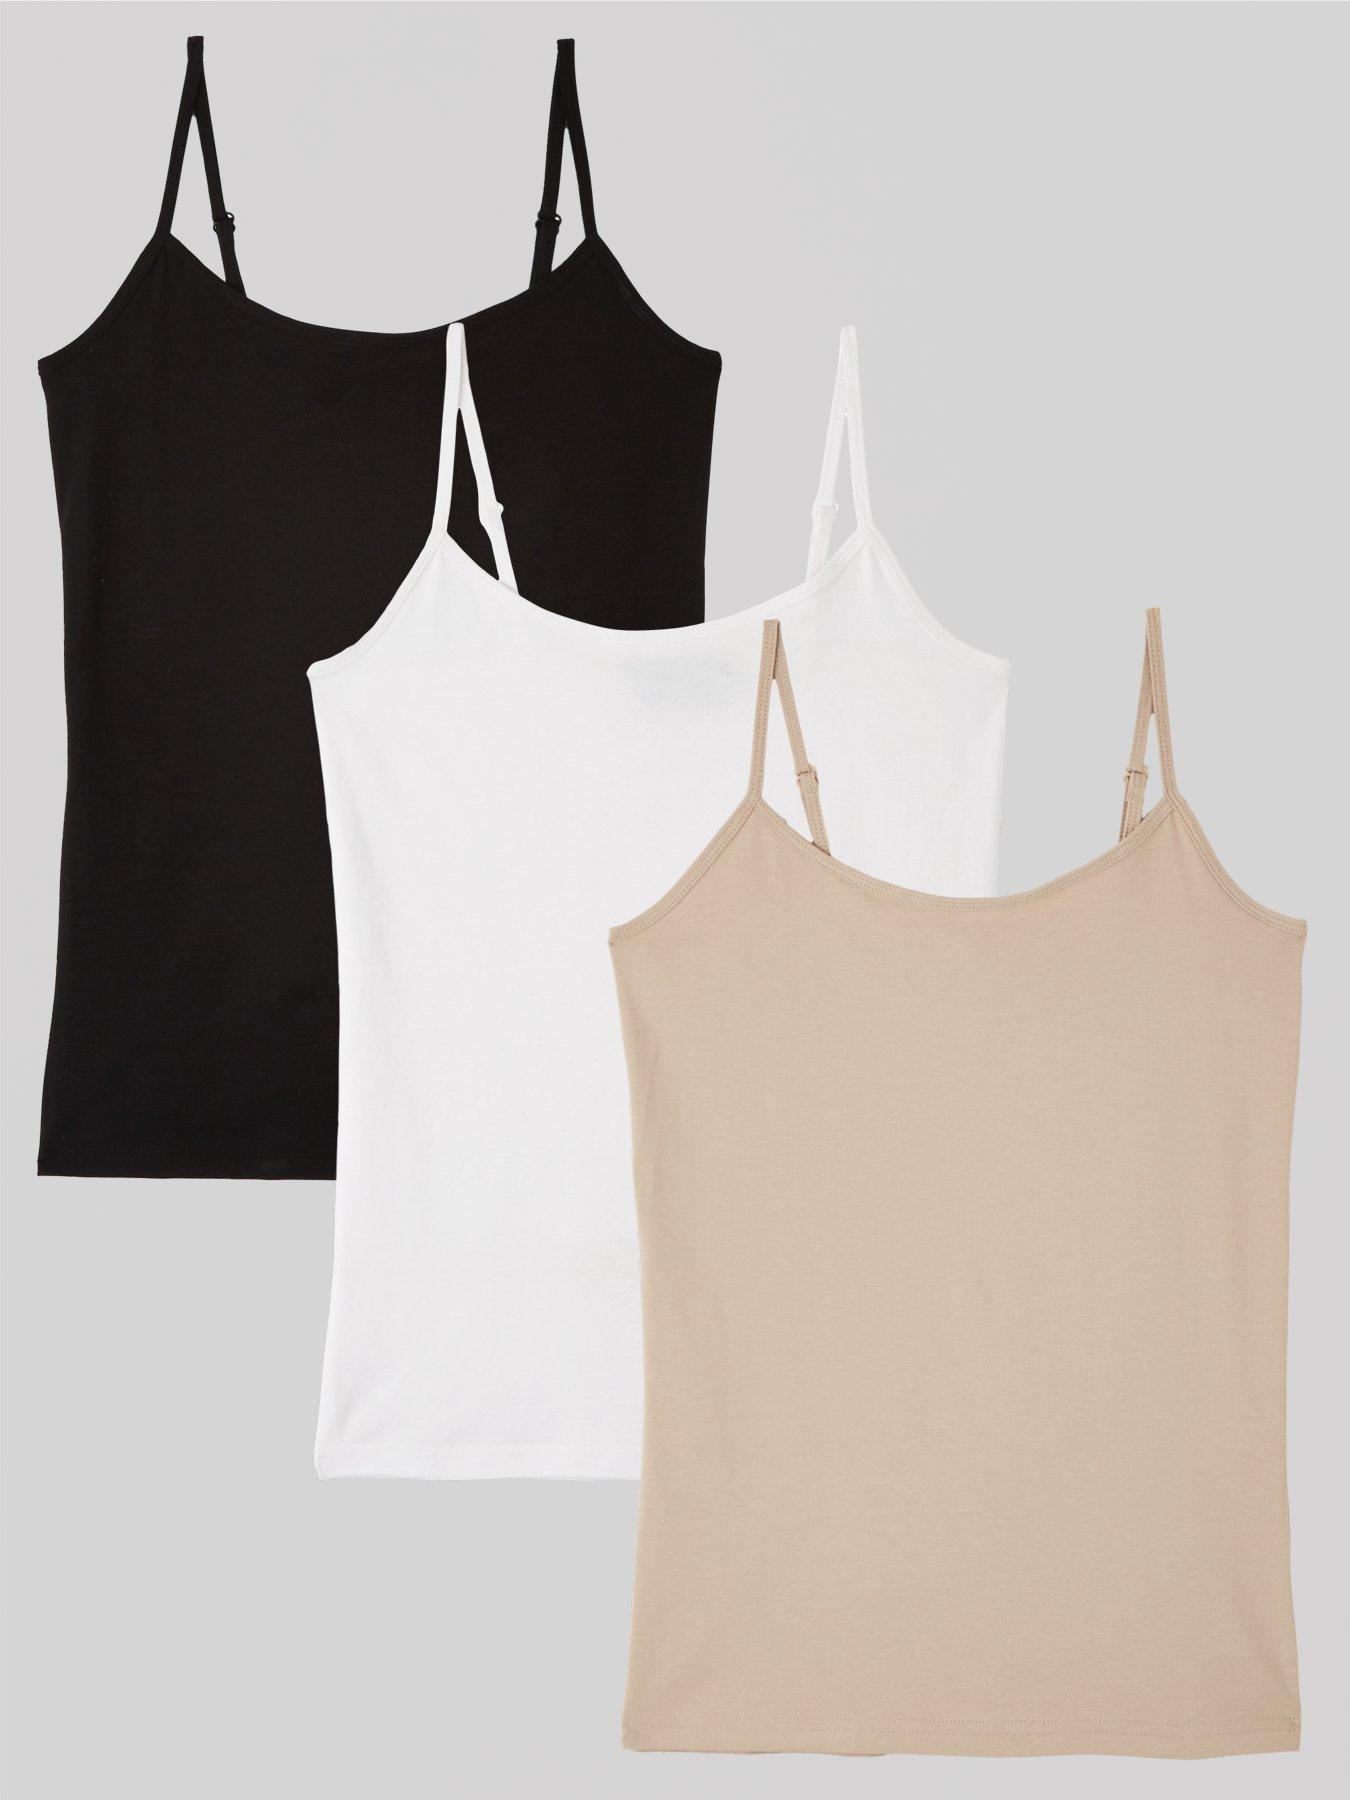 Get Ready for Summer with Stylish Cami Tops